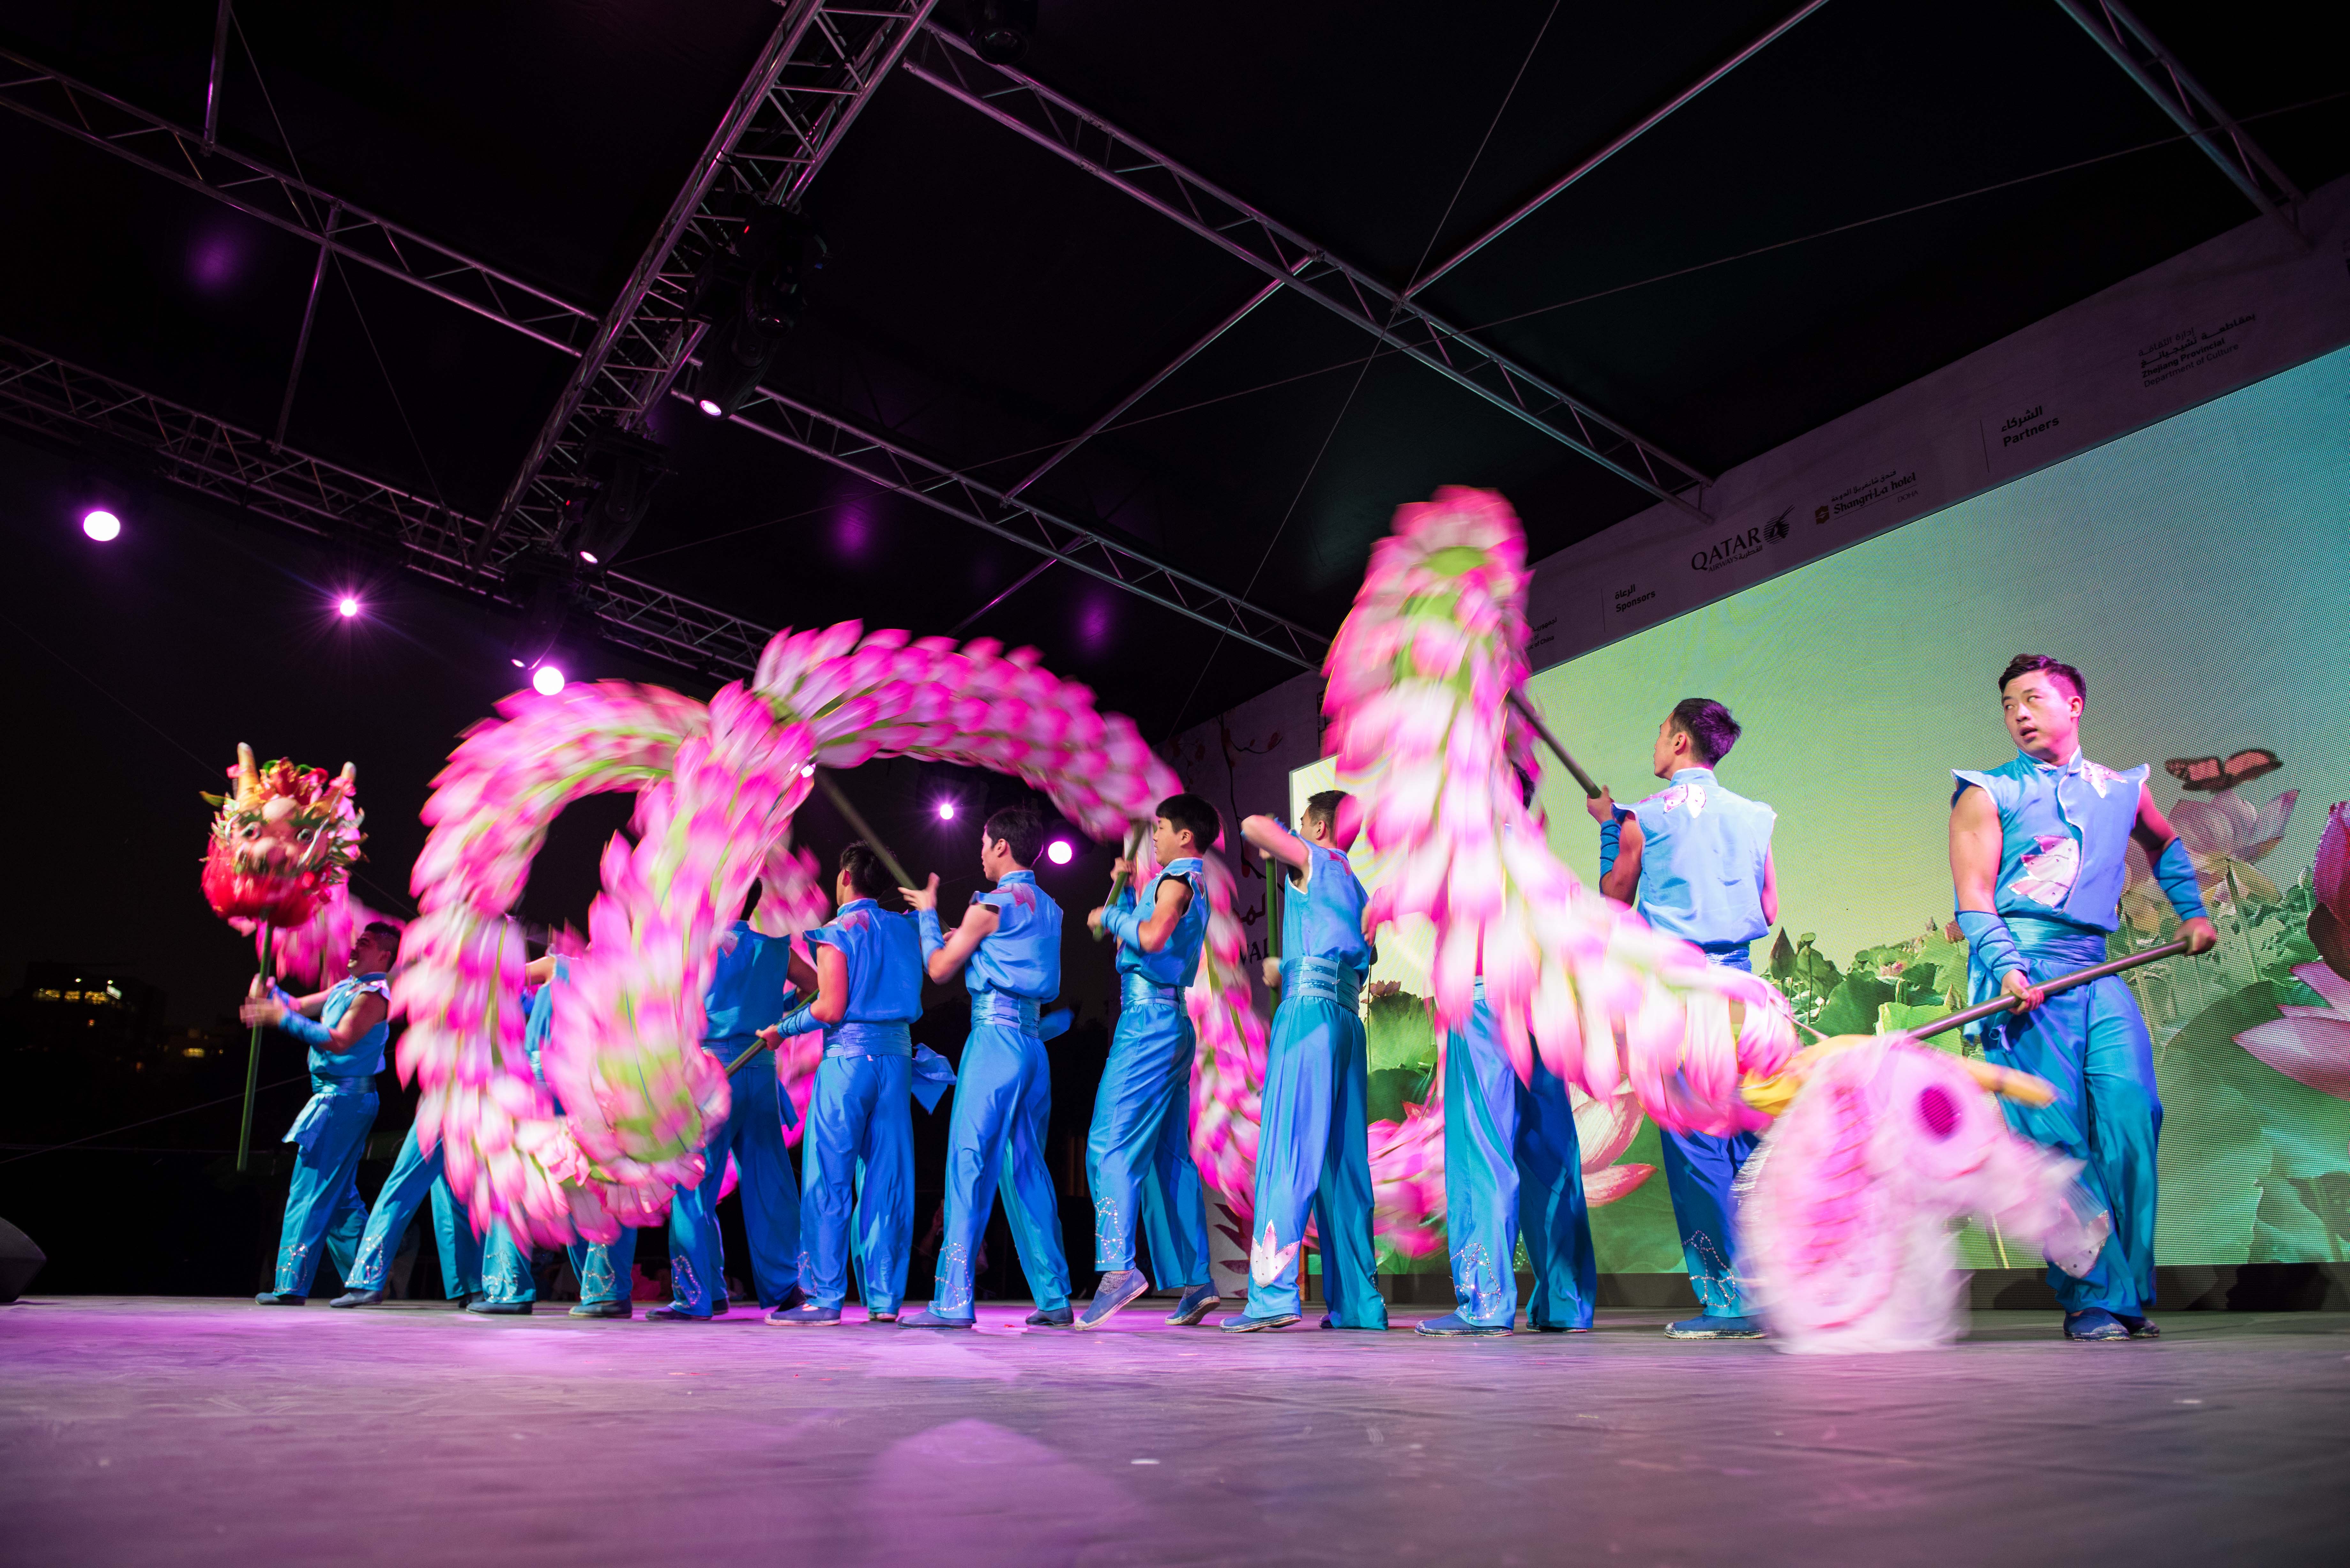 Chinese dancers perform a traditional dragon dance on stage during The Chinese Festival in Qatar.